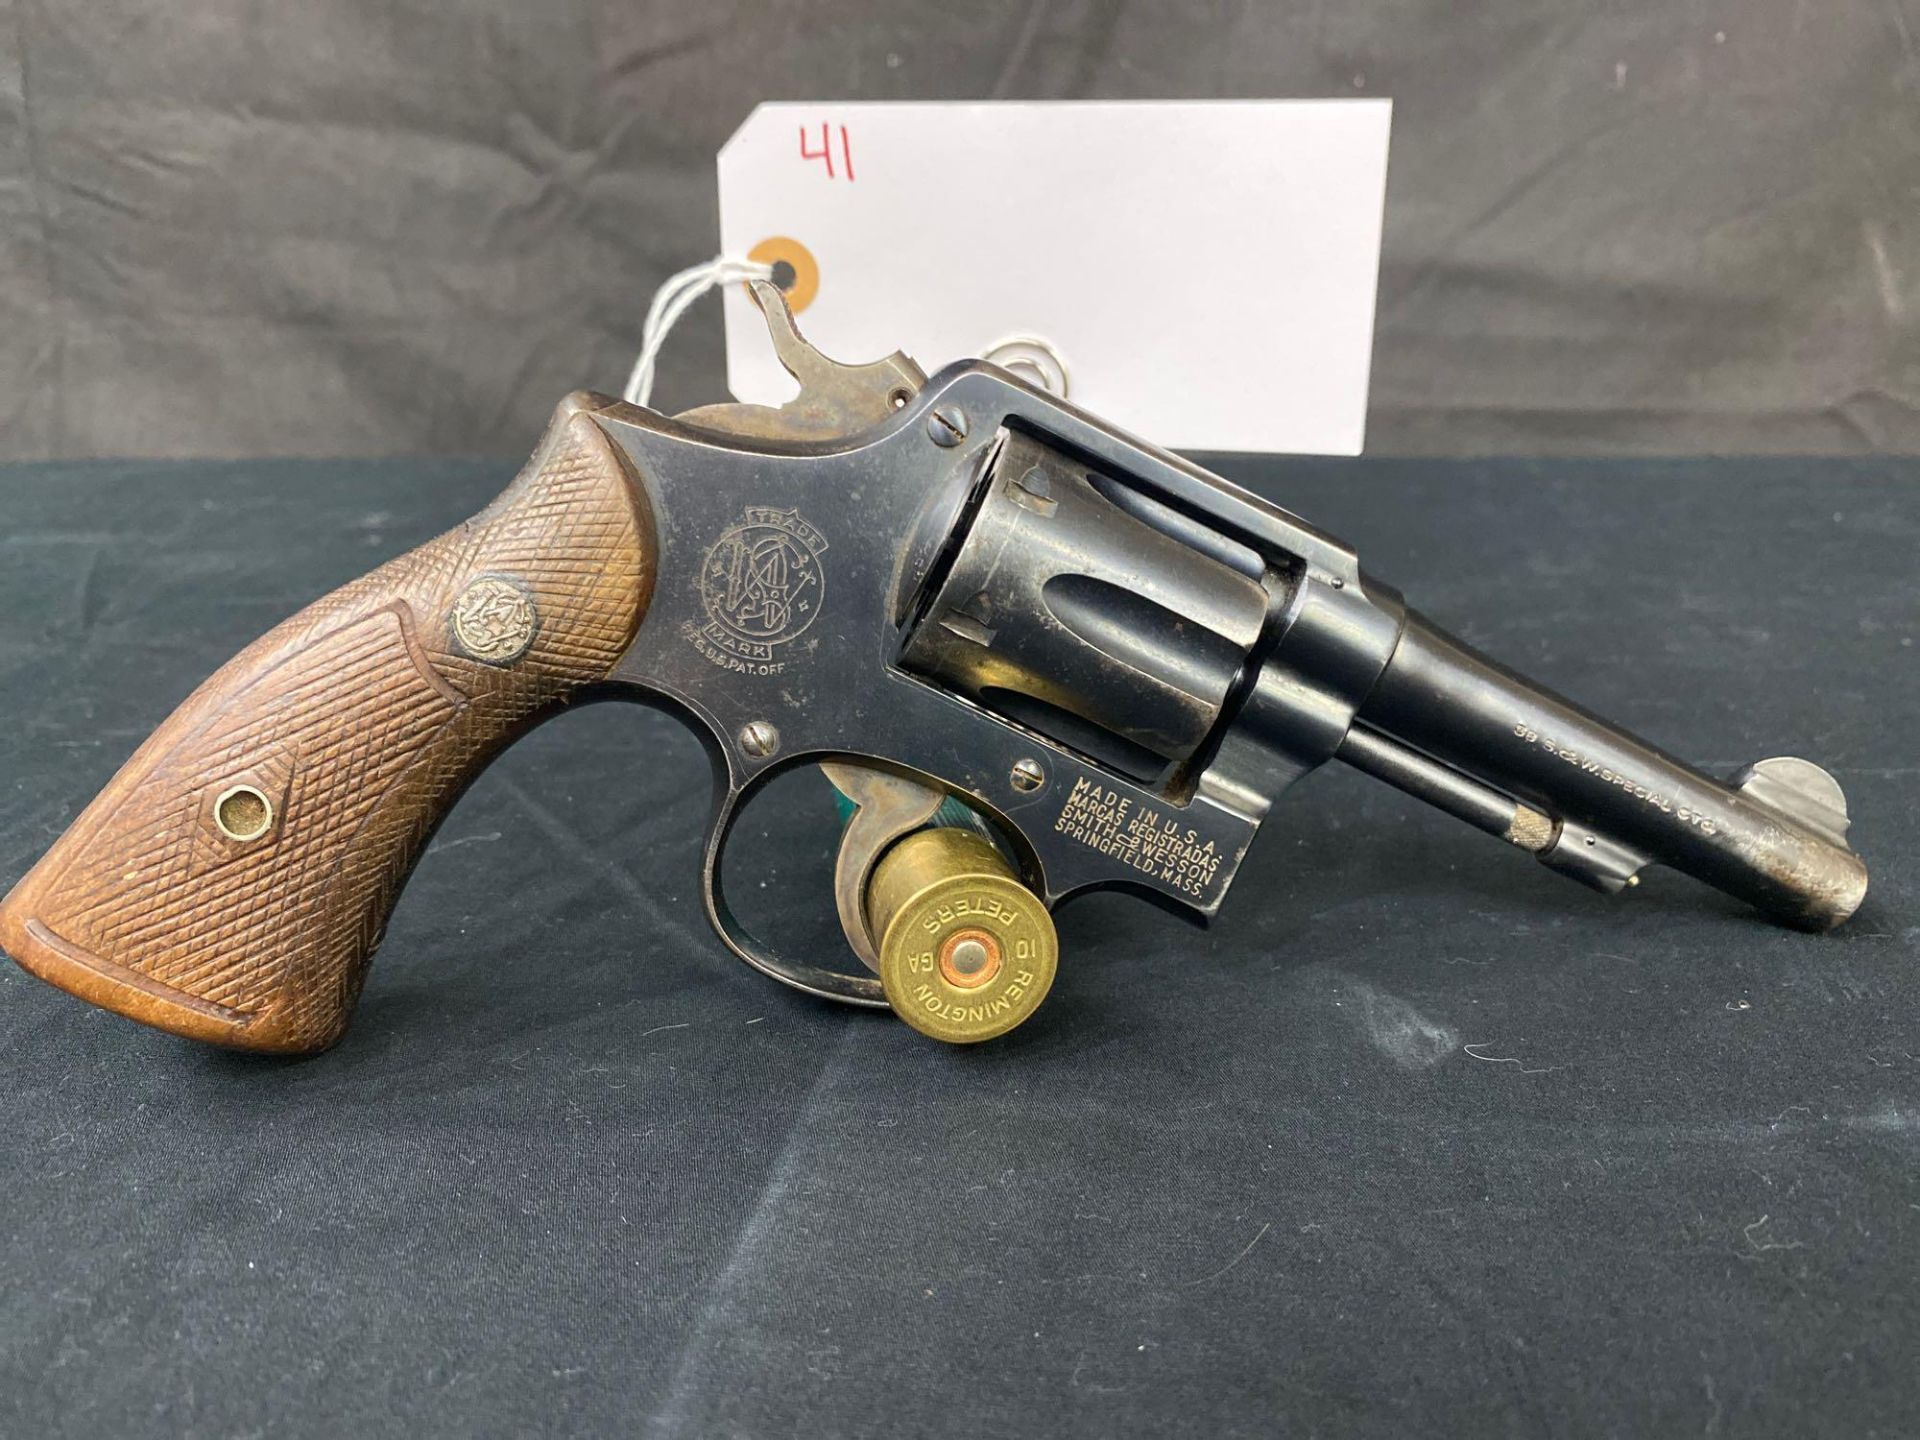 SMITH & WESSON 38 SPECIAL REVOLVER. SN#C216728 - Image 2 of 3